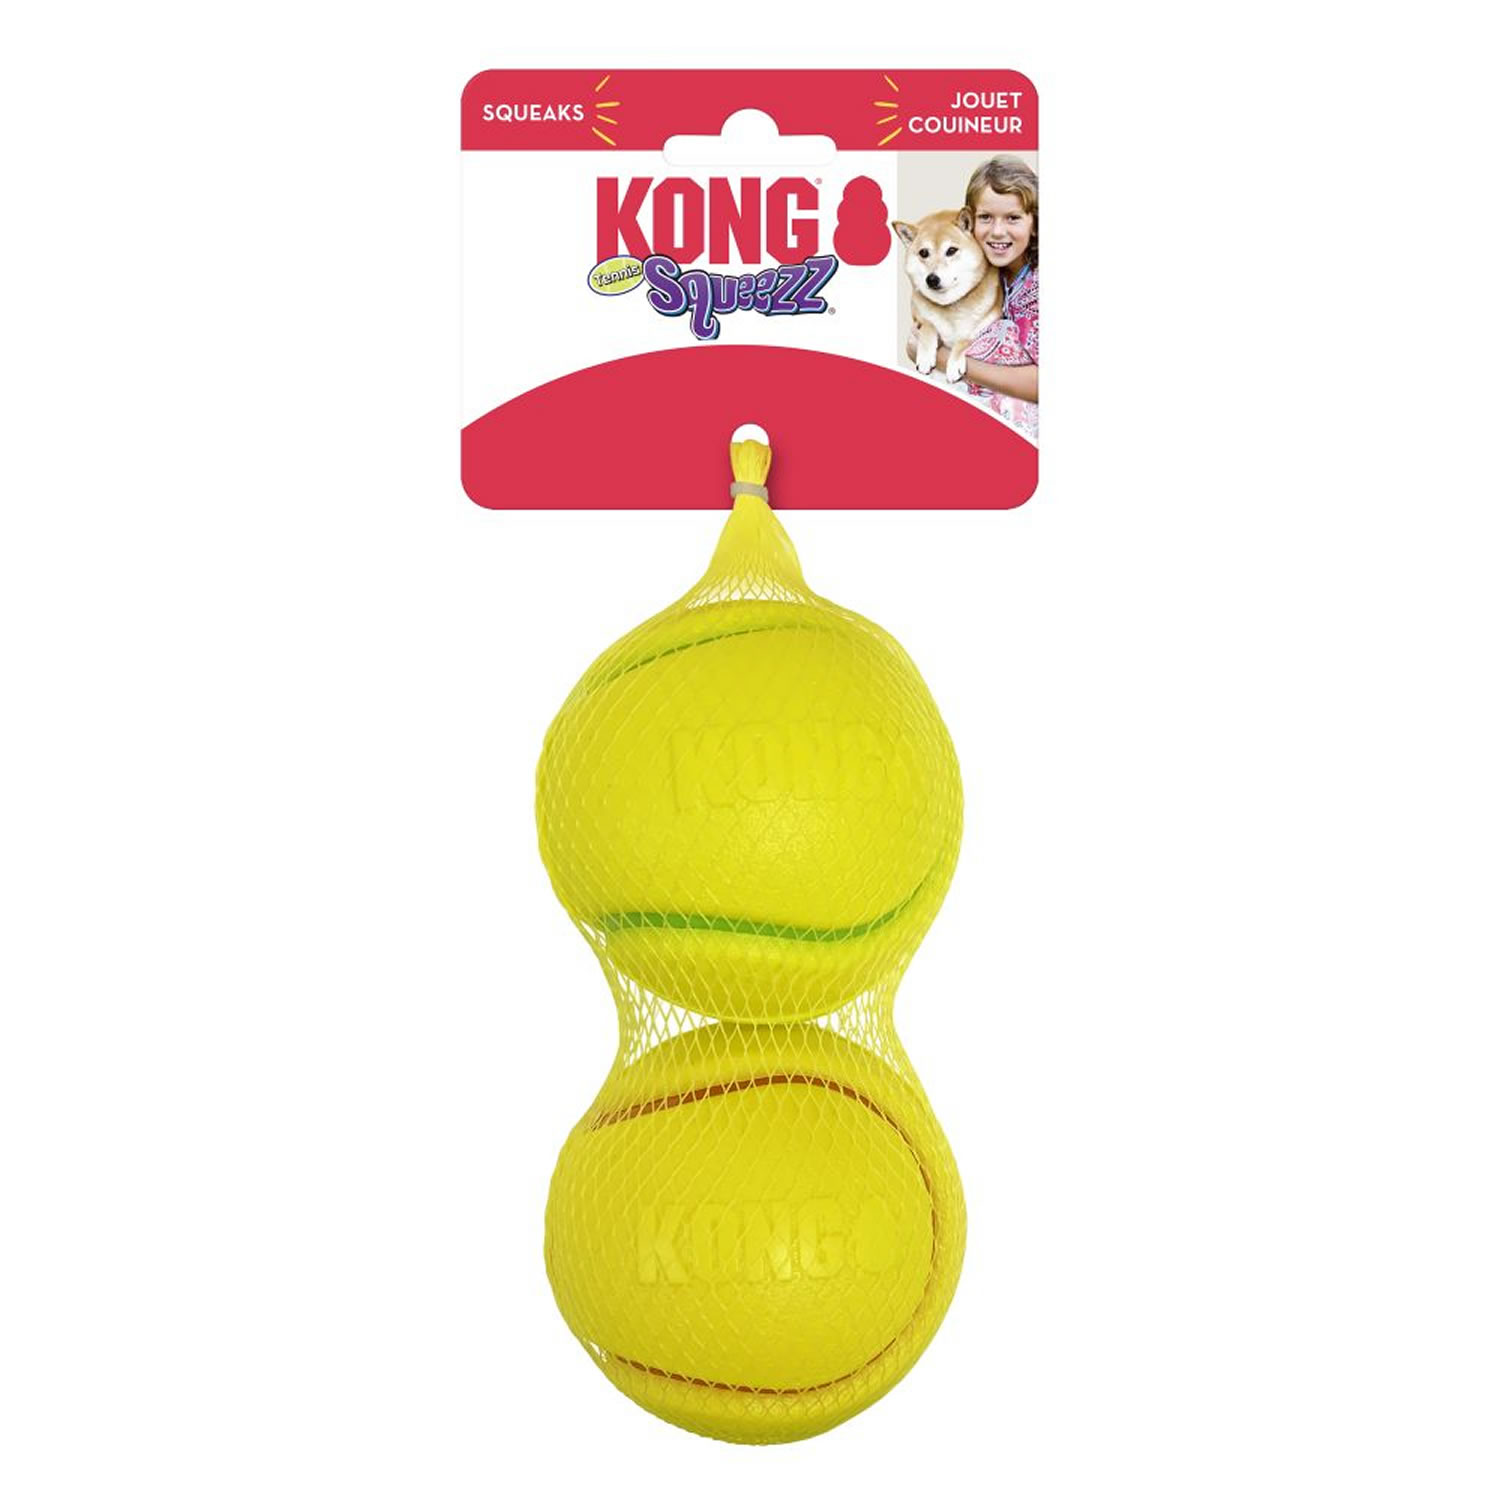 KONG SQUEEZZ TENNIS LARGE  2 PACK